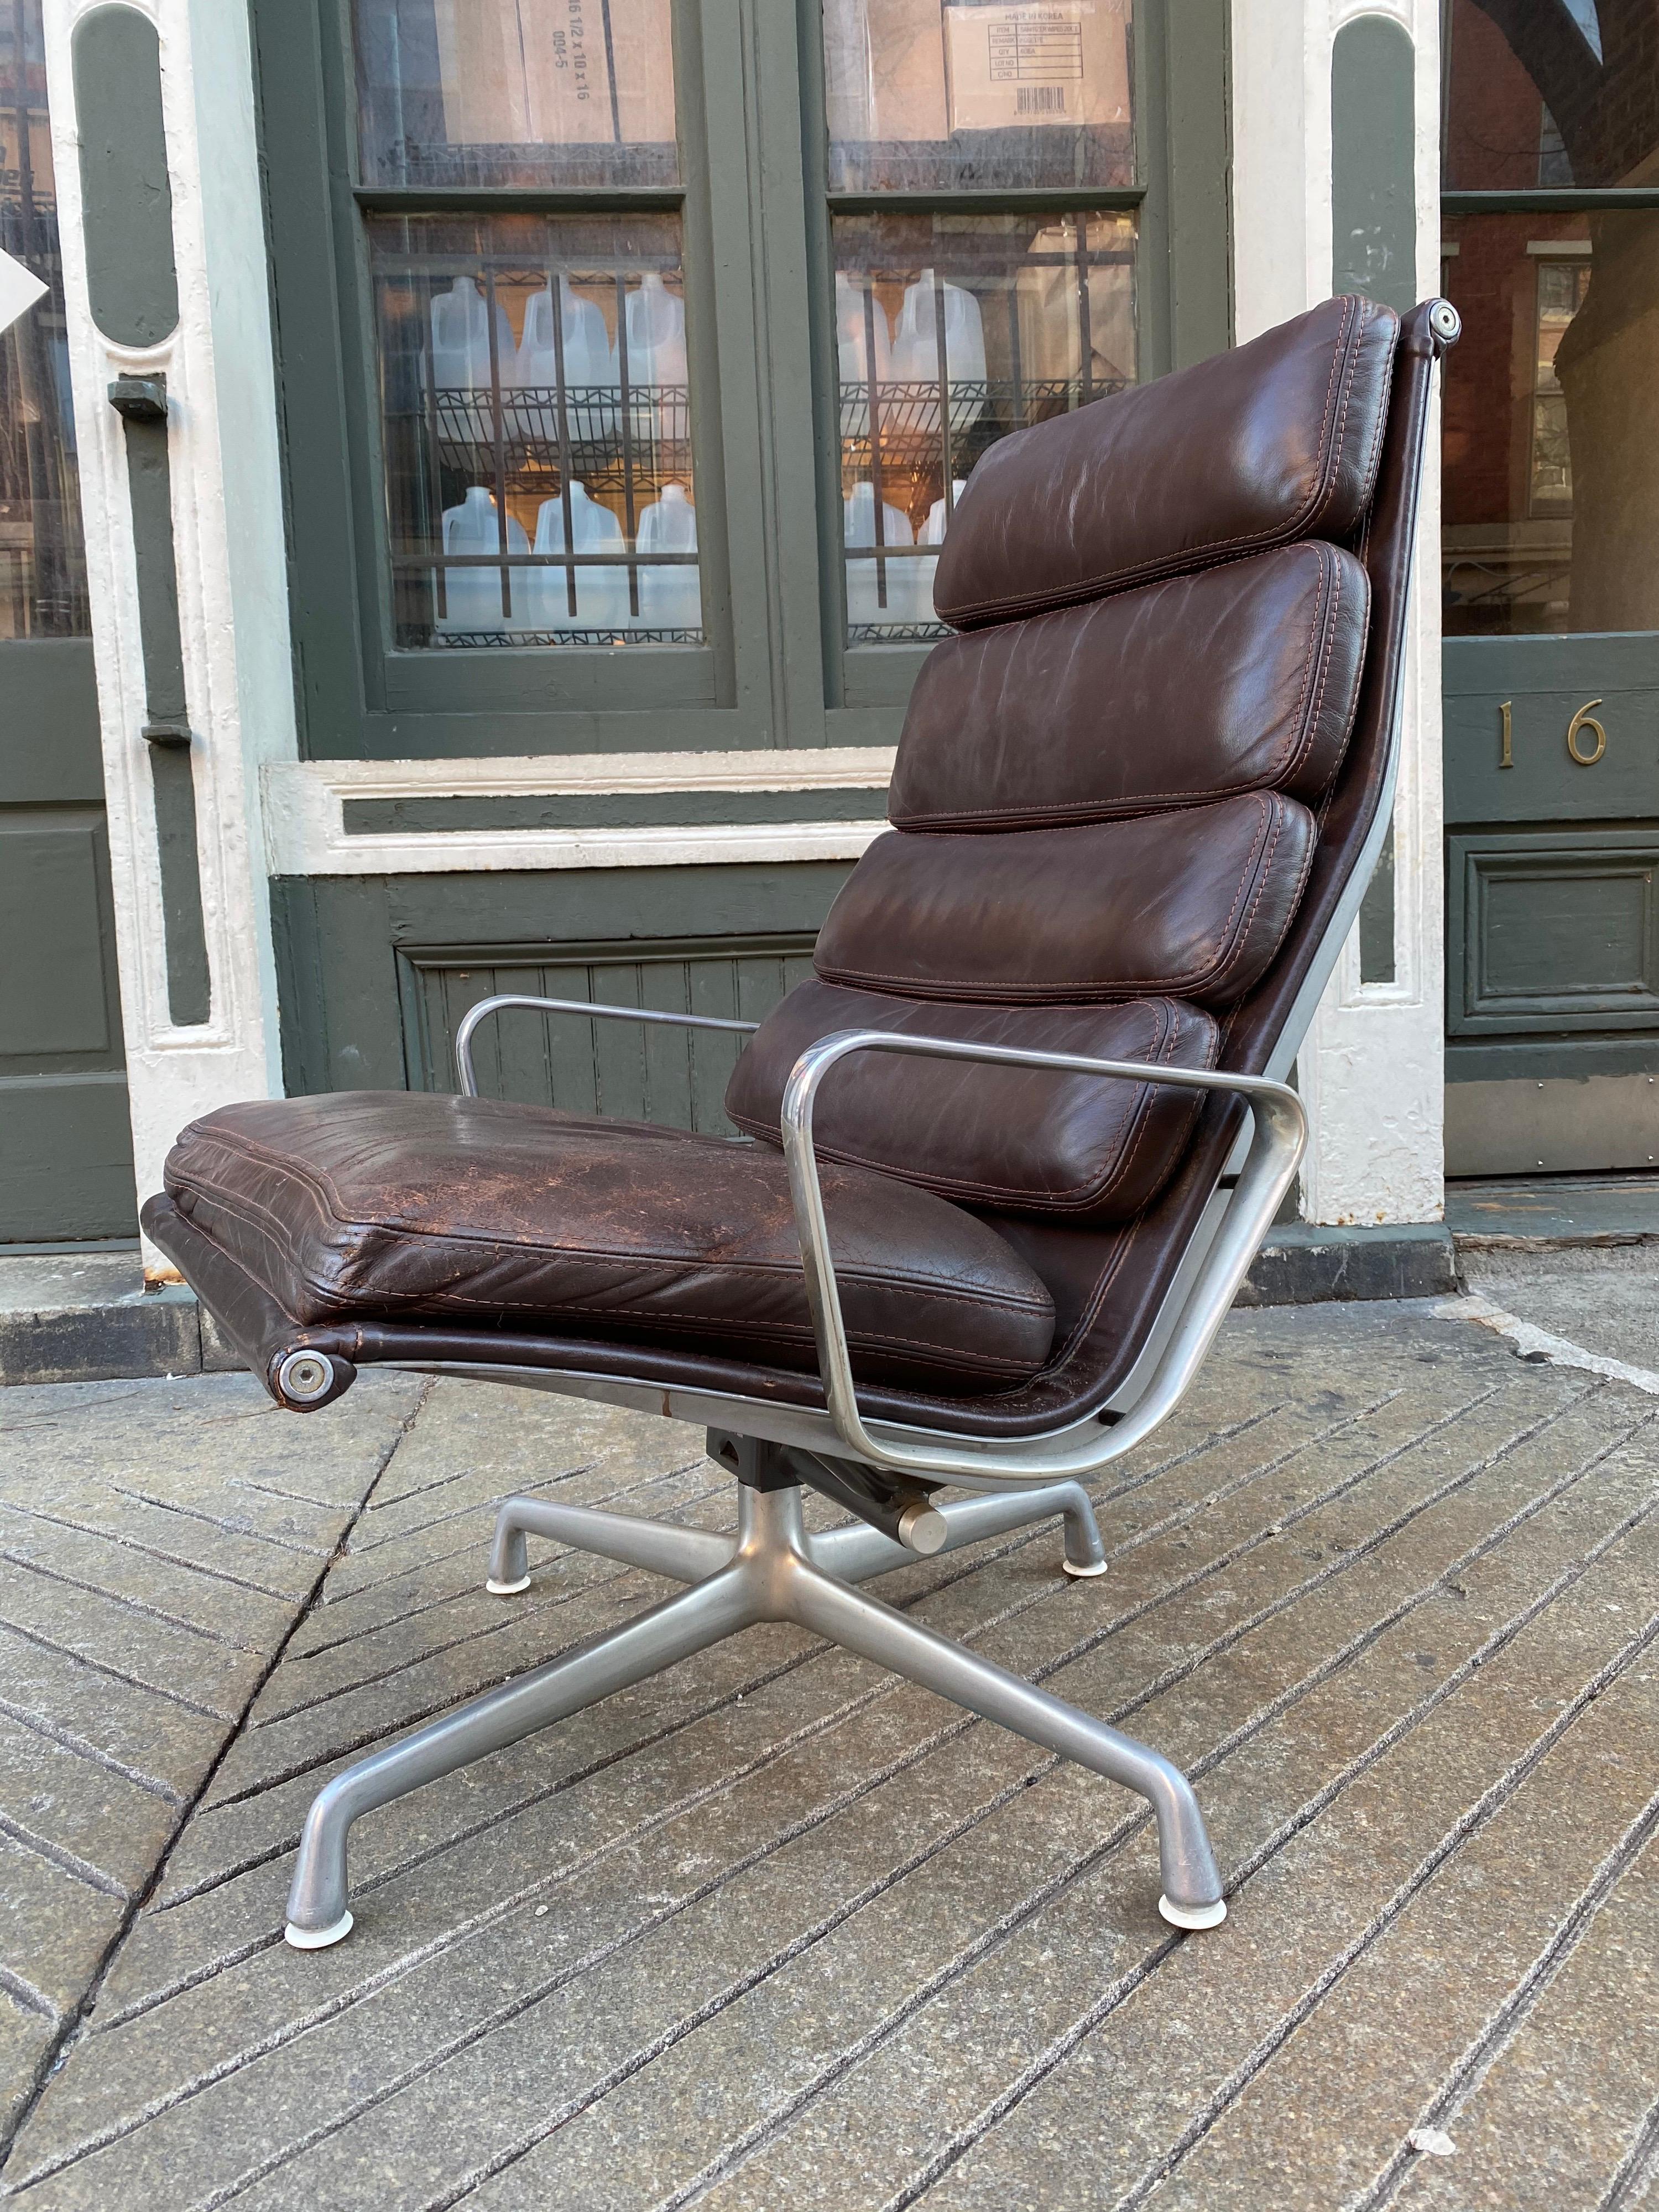 Eames soft pad lounge chair in brown leather for Herman Miller. Chair is about 25 years old and shows wear as seen in the photos. Seat area has some roughness to the leather. Wear marks to edges or corners. I had new foam put in the seat cushion.